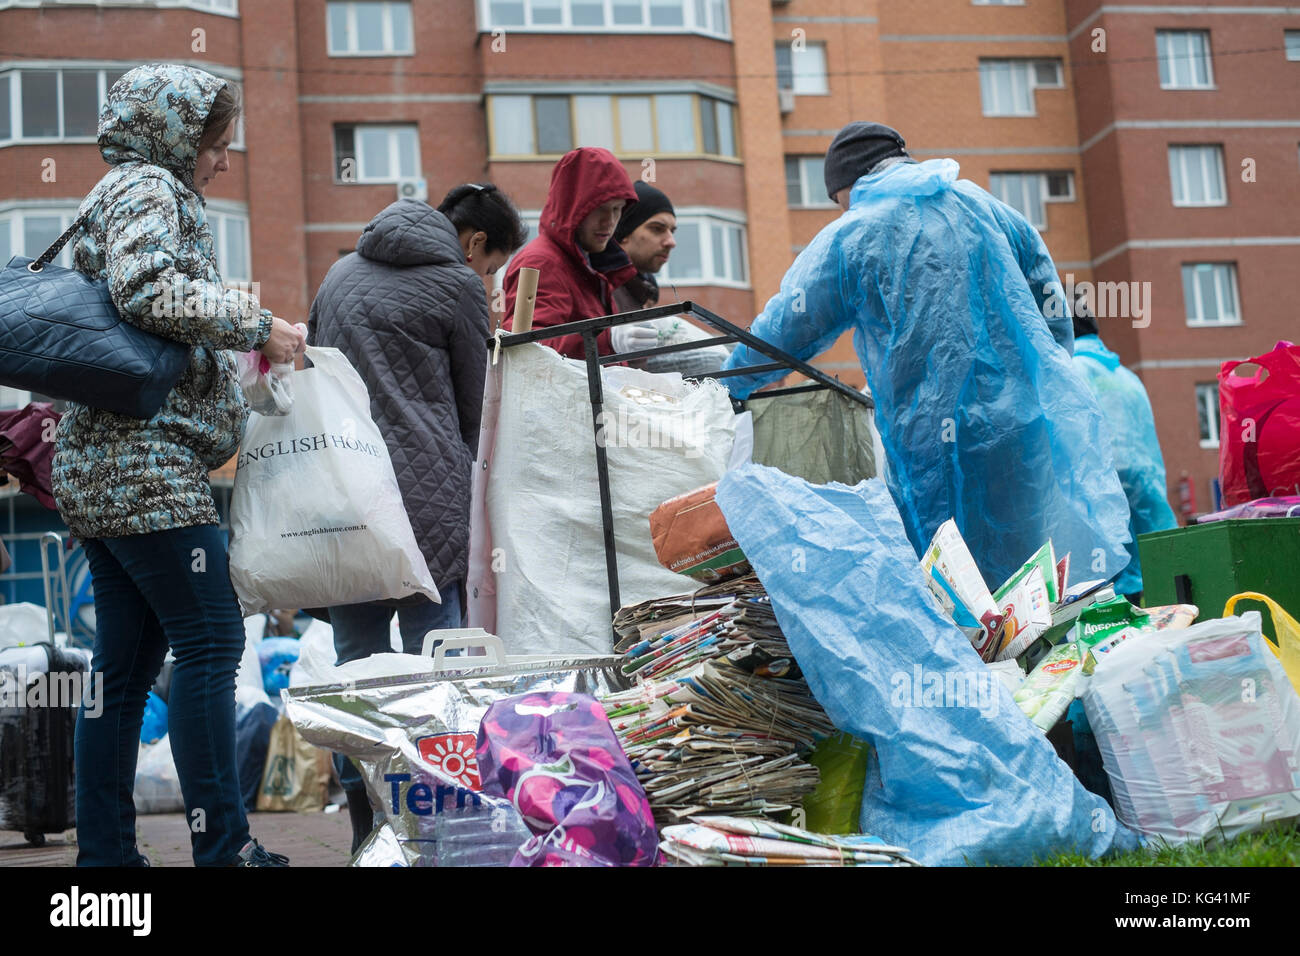 Volunteers collect household waste for recycling in a square in the town of Zheleznodorozhny, Moscow province, Russia. Local inhabitants have sorted their waste in advance at home in preceding weeks and can leave it in separate bags or containers here, for further transportation and recycling elsewhere. For now, the volunteers come here once a month, but the idea gains popularity. Waste sorting is still uncommon in Russia, where some ninety percent of household waste ends up at huge, open rubbish dumps.garbage Stock Photo